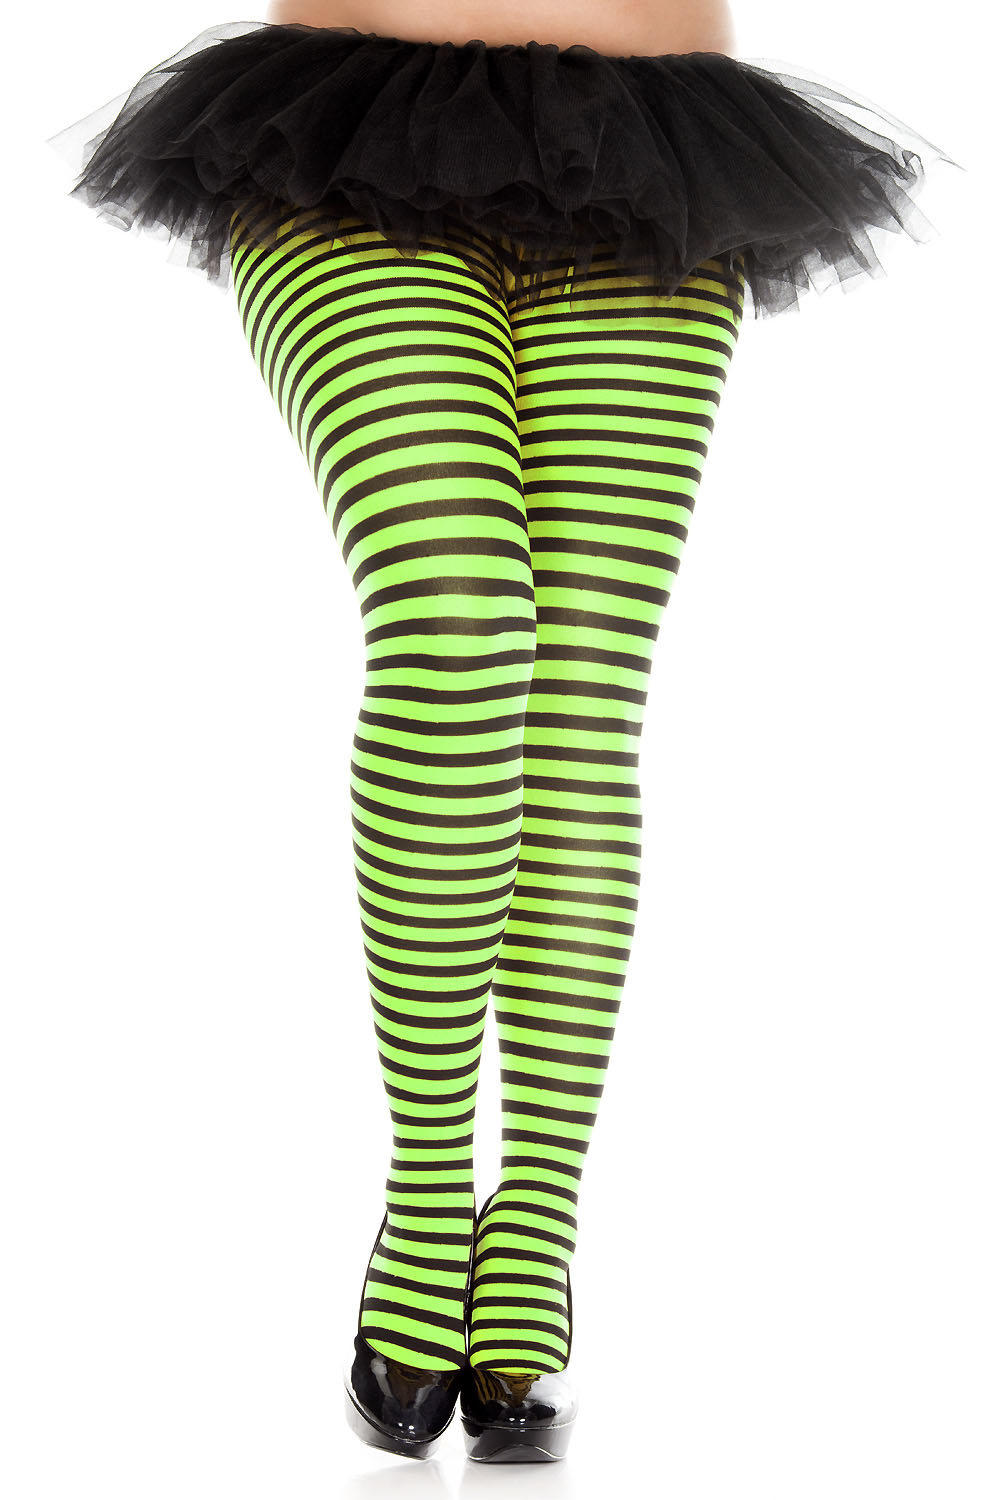 Adult Women Plus Size Black And Neon Green Opaque Striped Tights